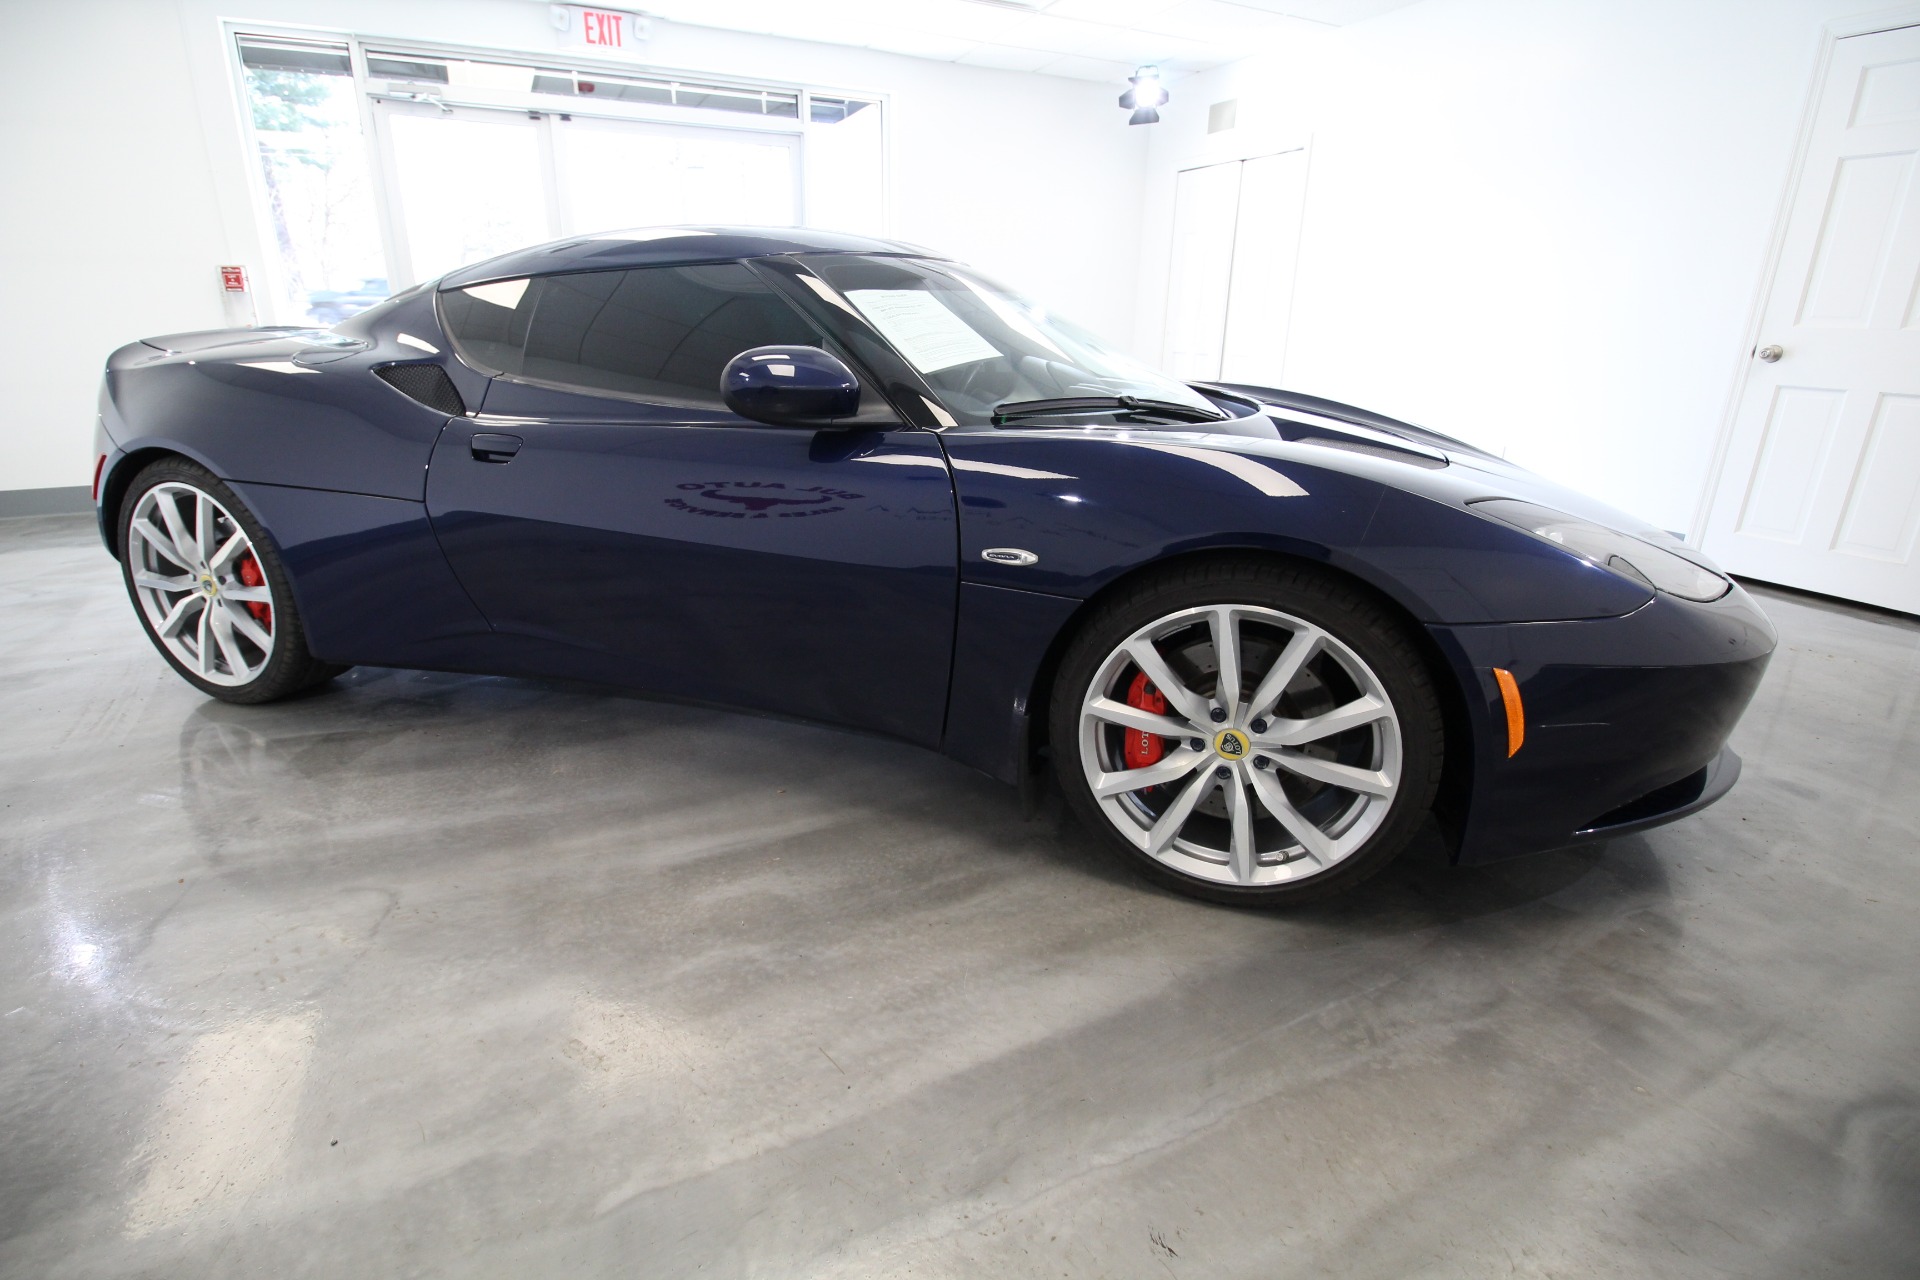 Used 2013 BLUE Lotus Evora Coupe 2+2 LOW MILES SUPER CLEAN NEW CAR TRADE WITH US | Albany, NY